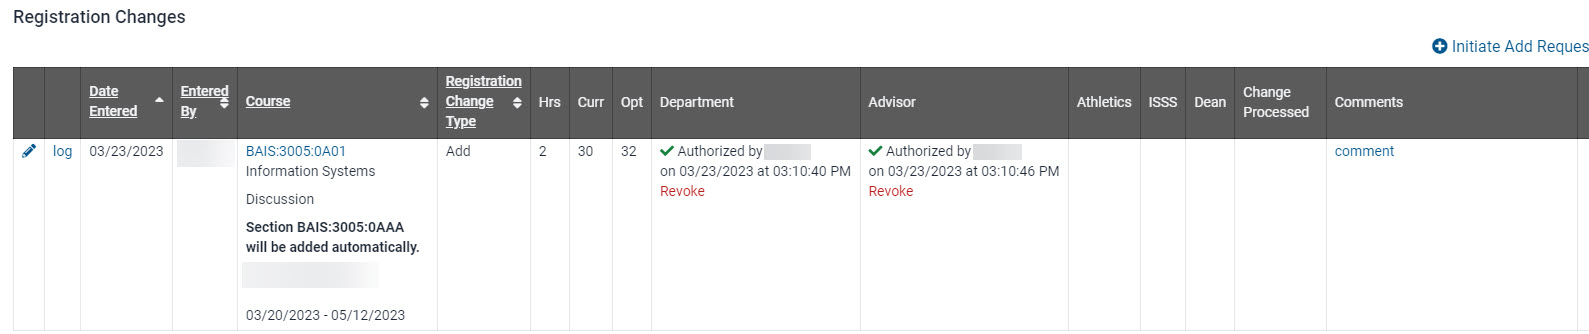 Add request authorizations granted.